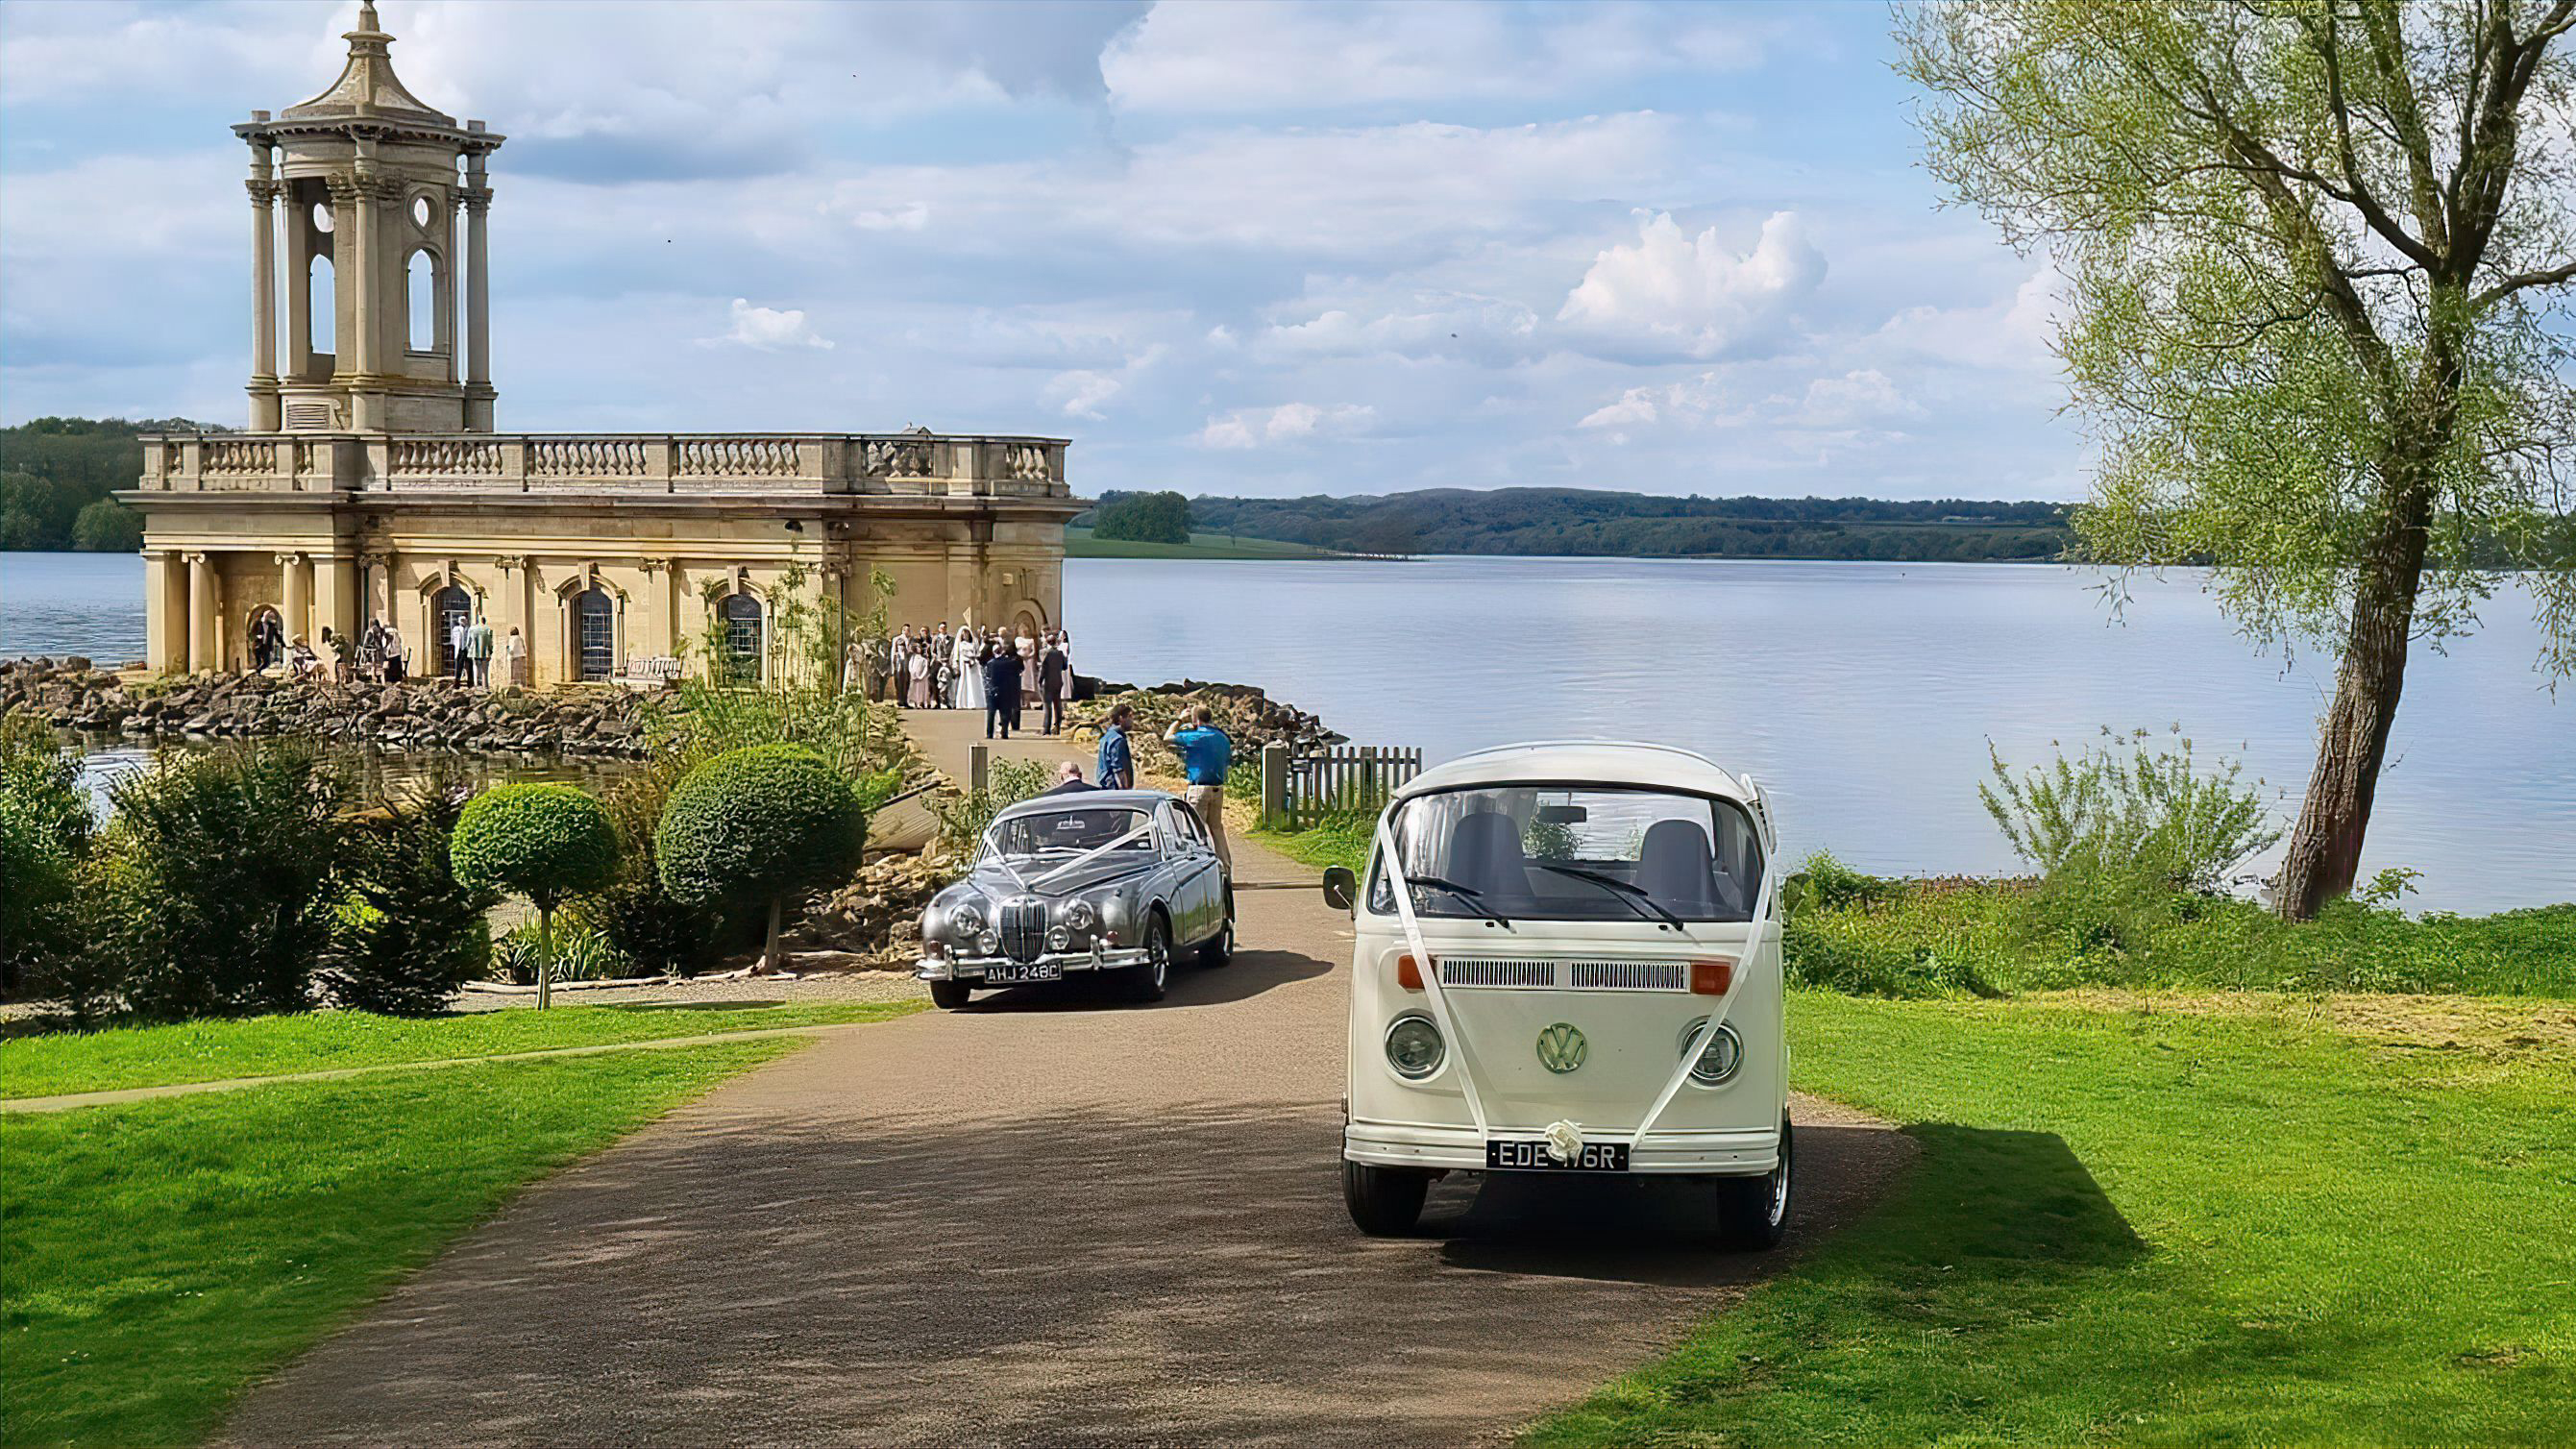 A classic VW campervan followed by a Jaguar Mk2 in front of Normanton Church in Leicestershire. Both vehicles are decorated with matching white ribbons. Wedding guests can be seen in the background.